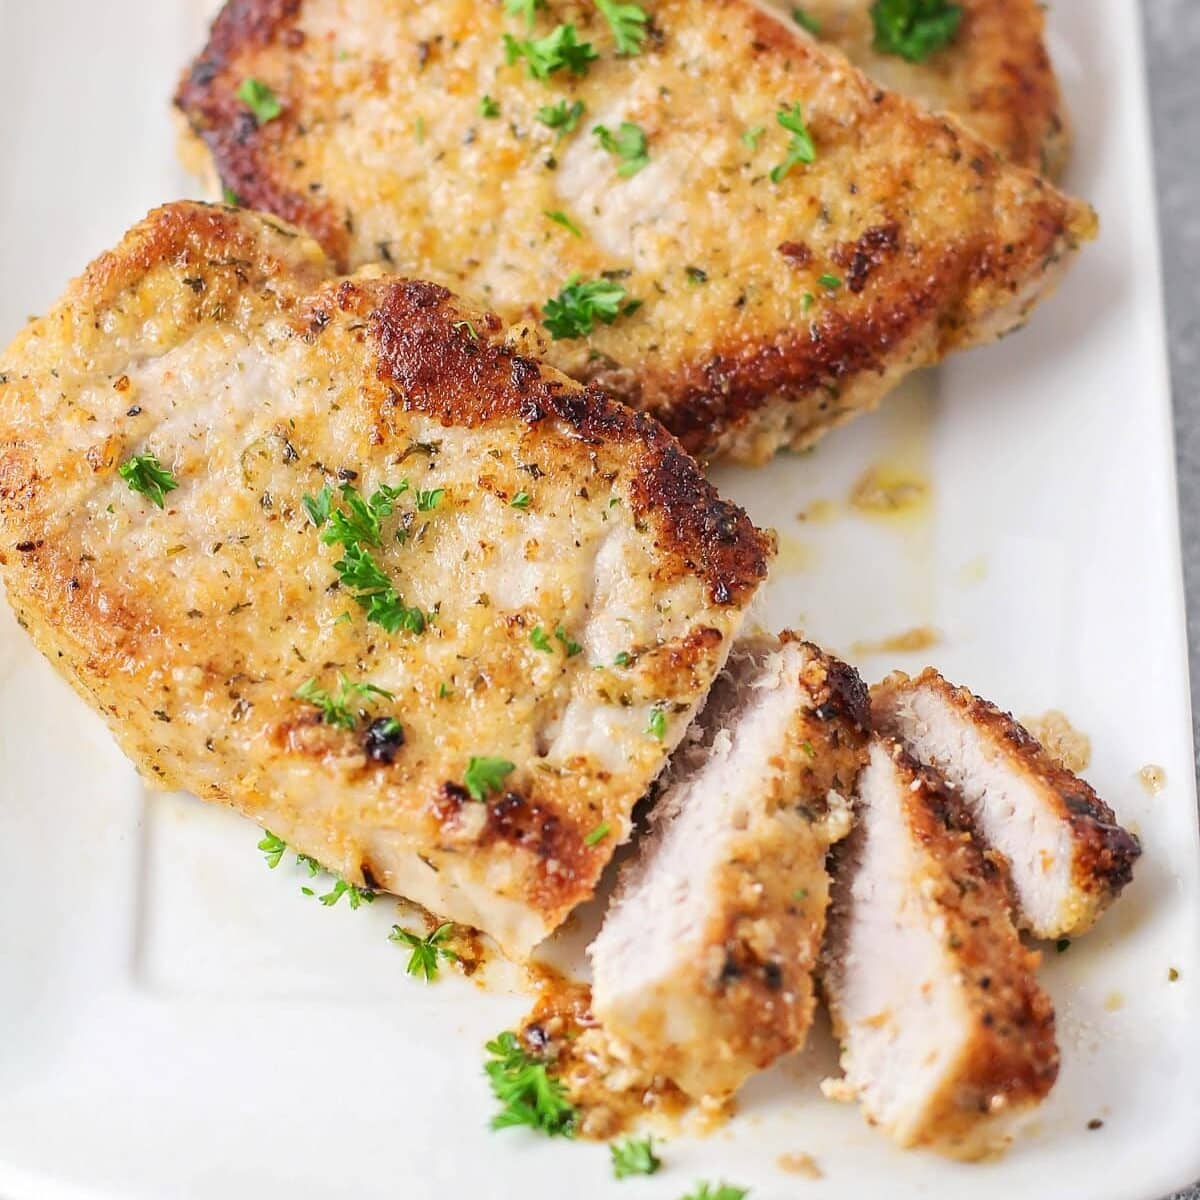 Parmesan Crusted pork chops close up image - cut up on white plate.